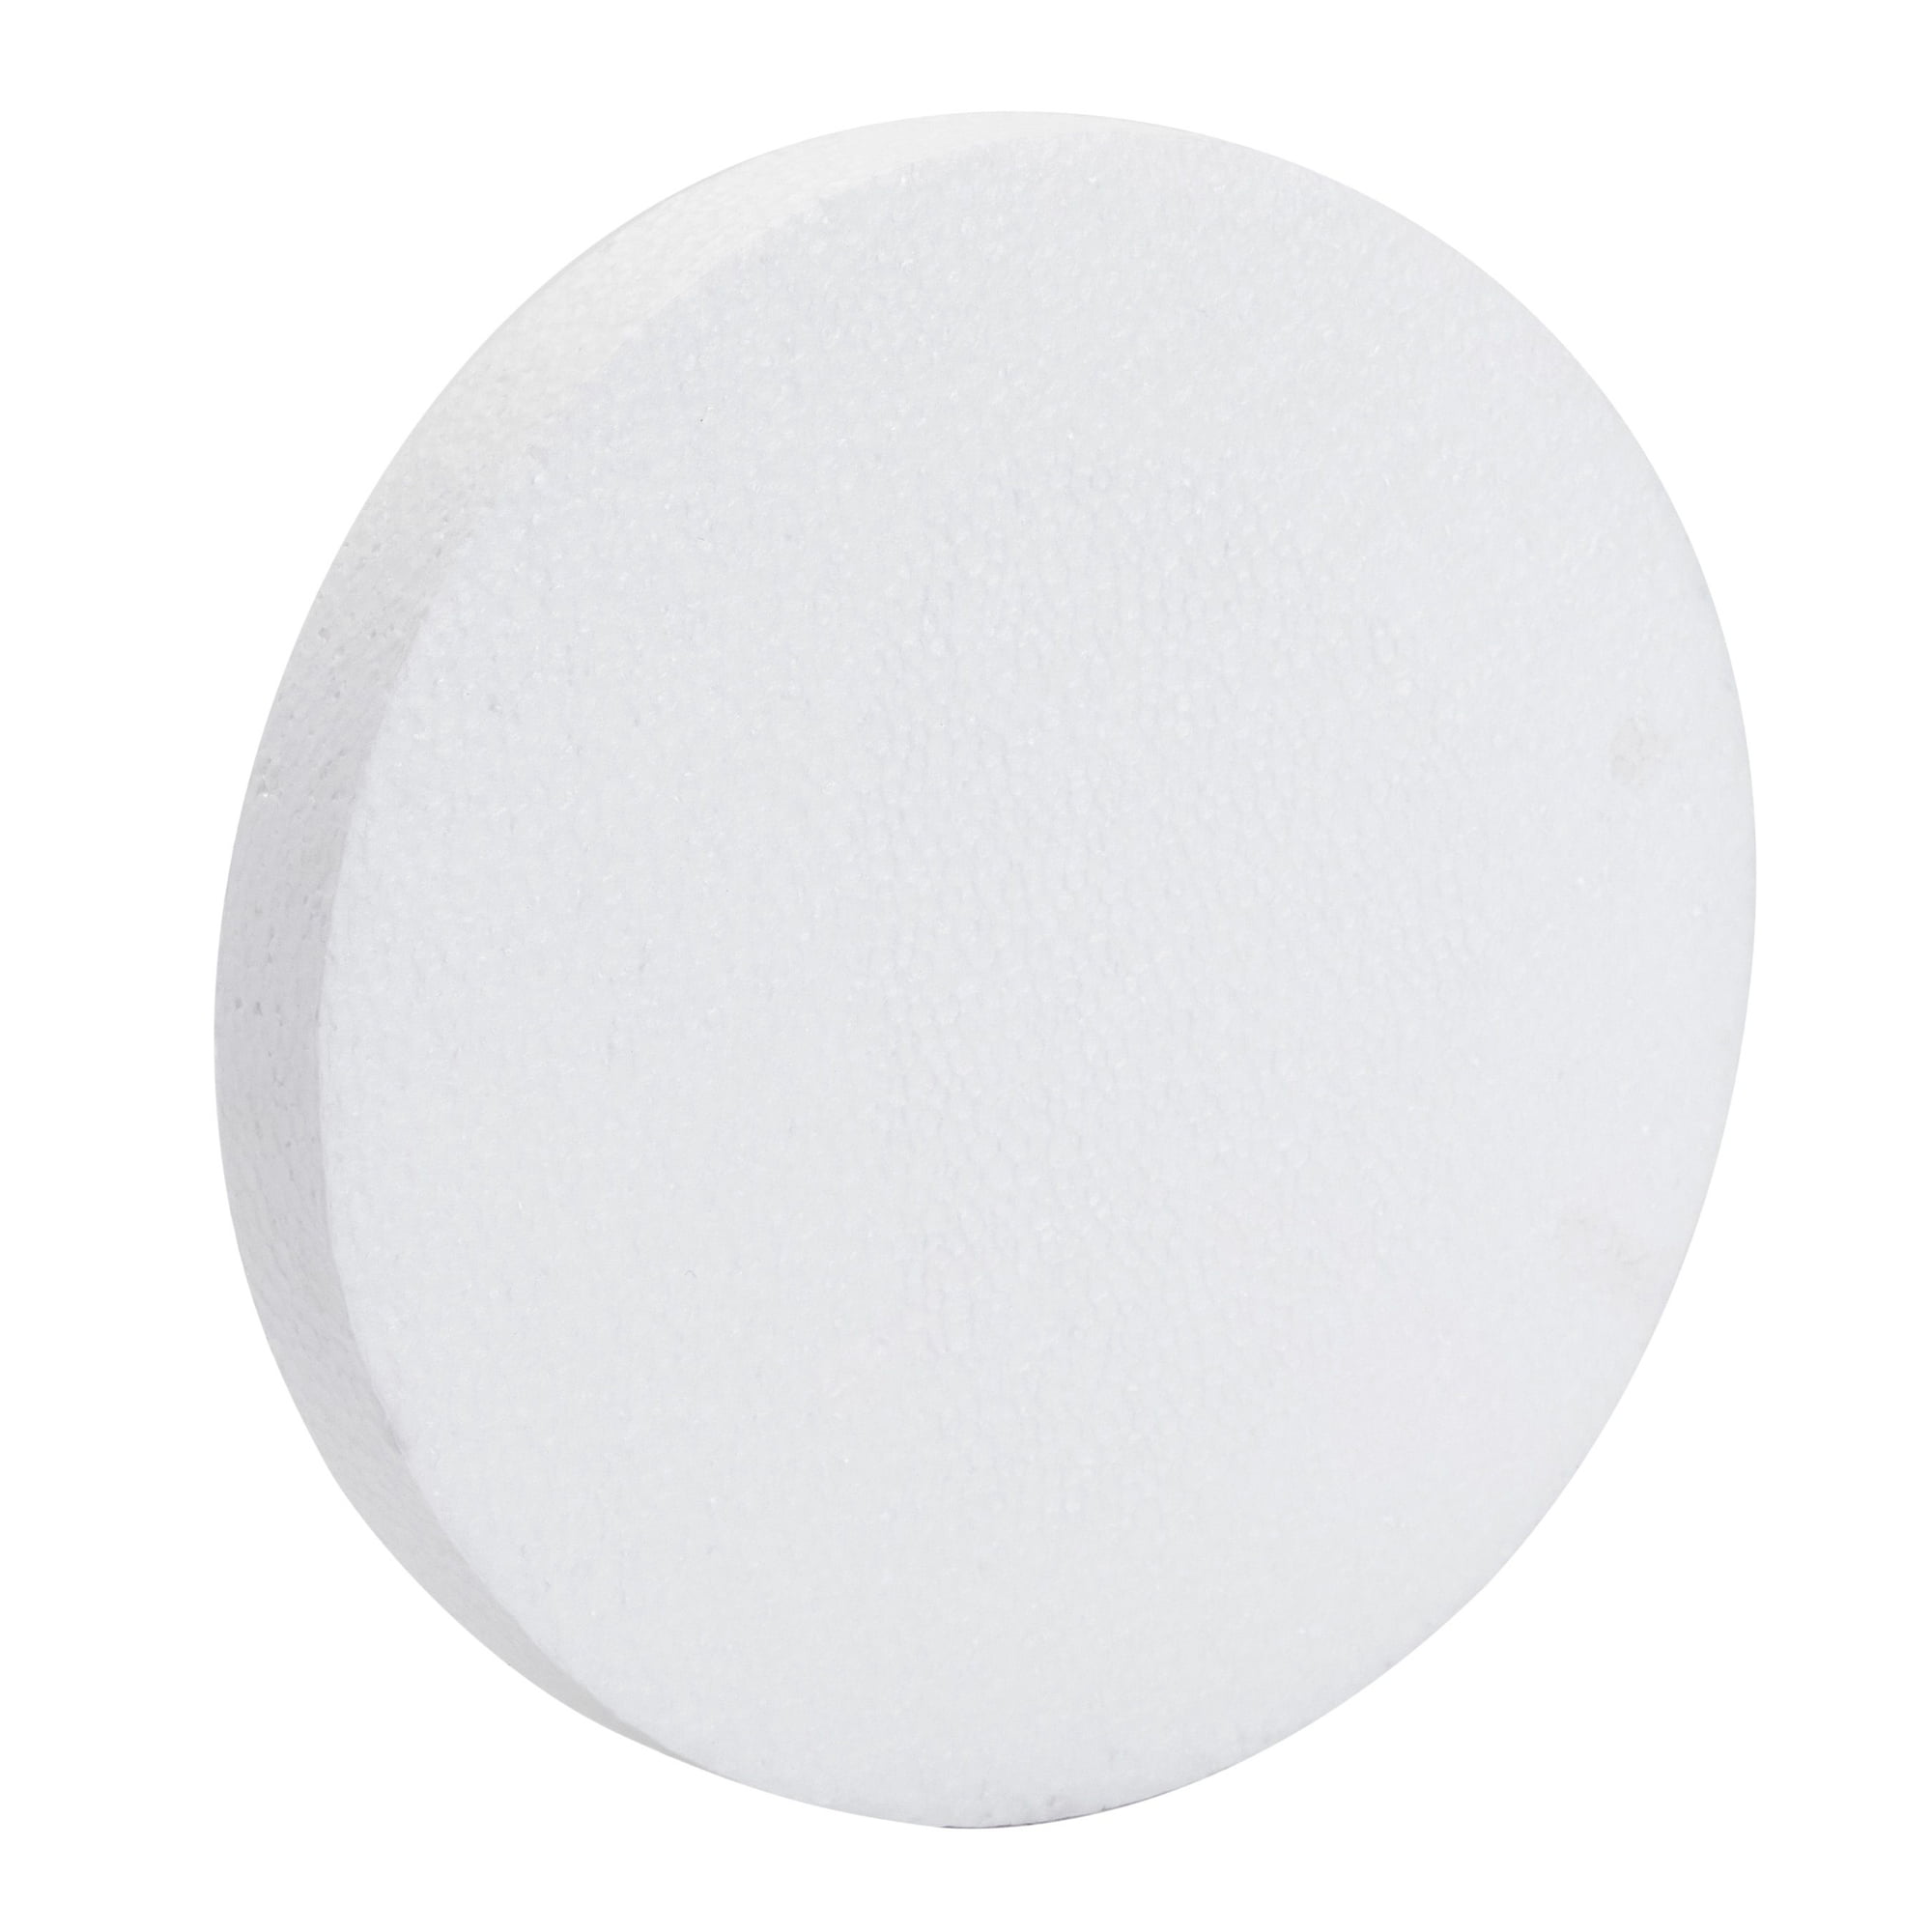 8 Inch Foam Circles for Crafts, 1 Inch Thick Round Polystyrene Discs for  DIY Projects (White, 6 Pack) 